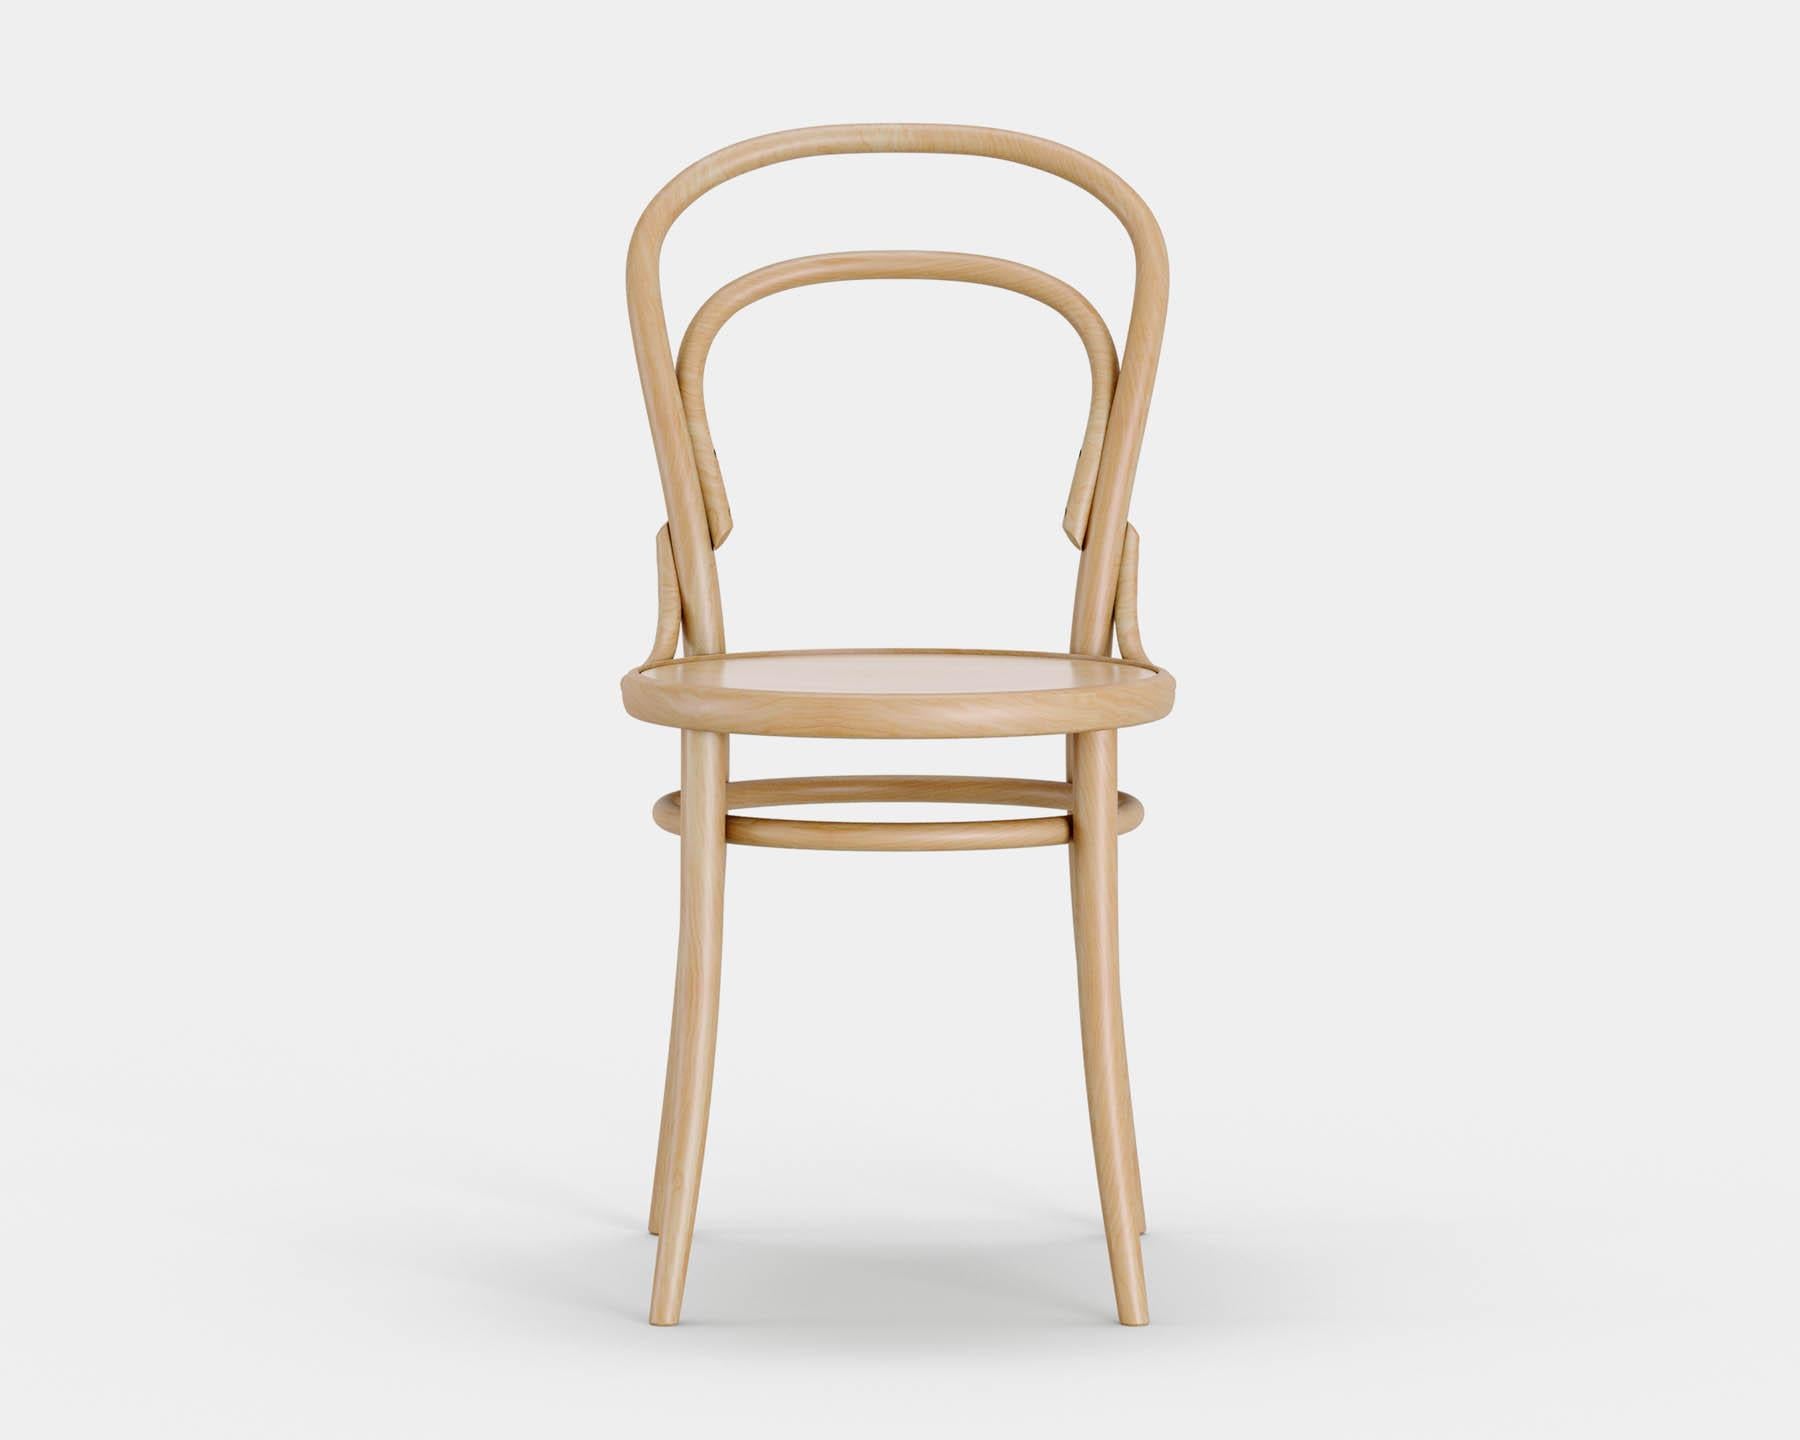 Chair No. 14
Iconic bistro chair conceived by Michael Thonet in 1869, now produced in the same manufacture in Czech Republic by TON. 

Wood: solid beech 
Finish: natural light 
Seat: plain wood 

--
Chair no. 14 by TON is one of the oldest,